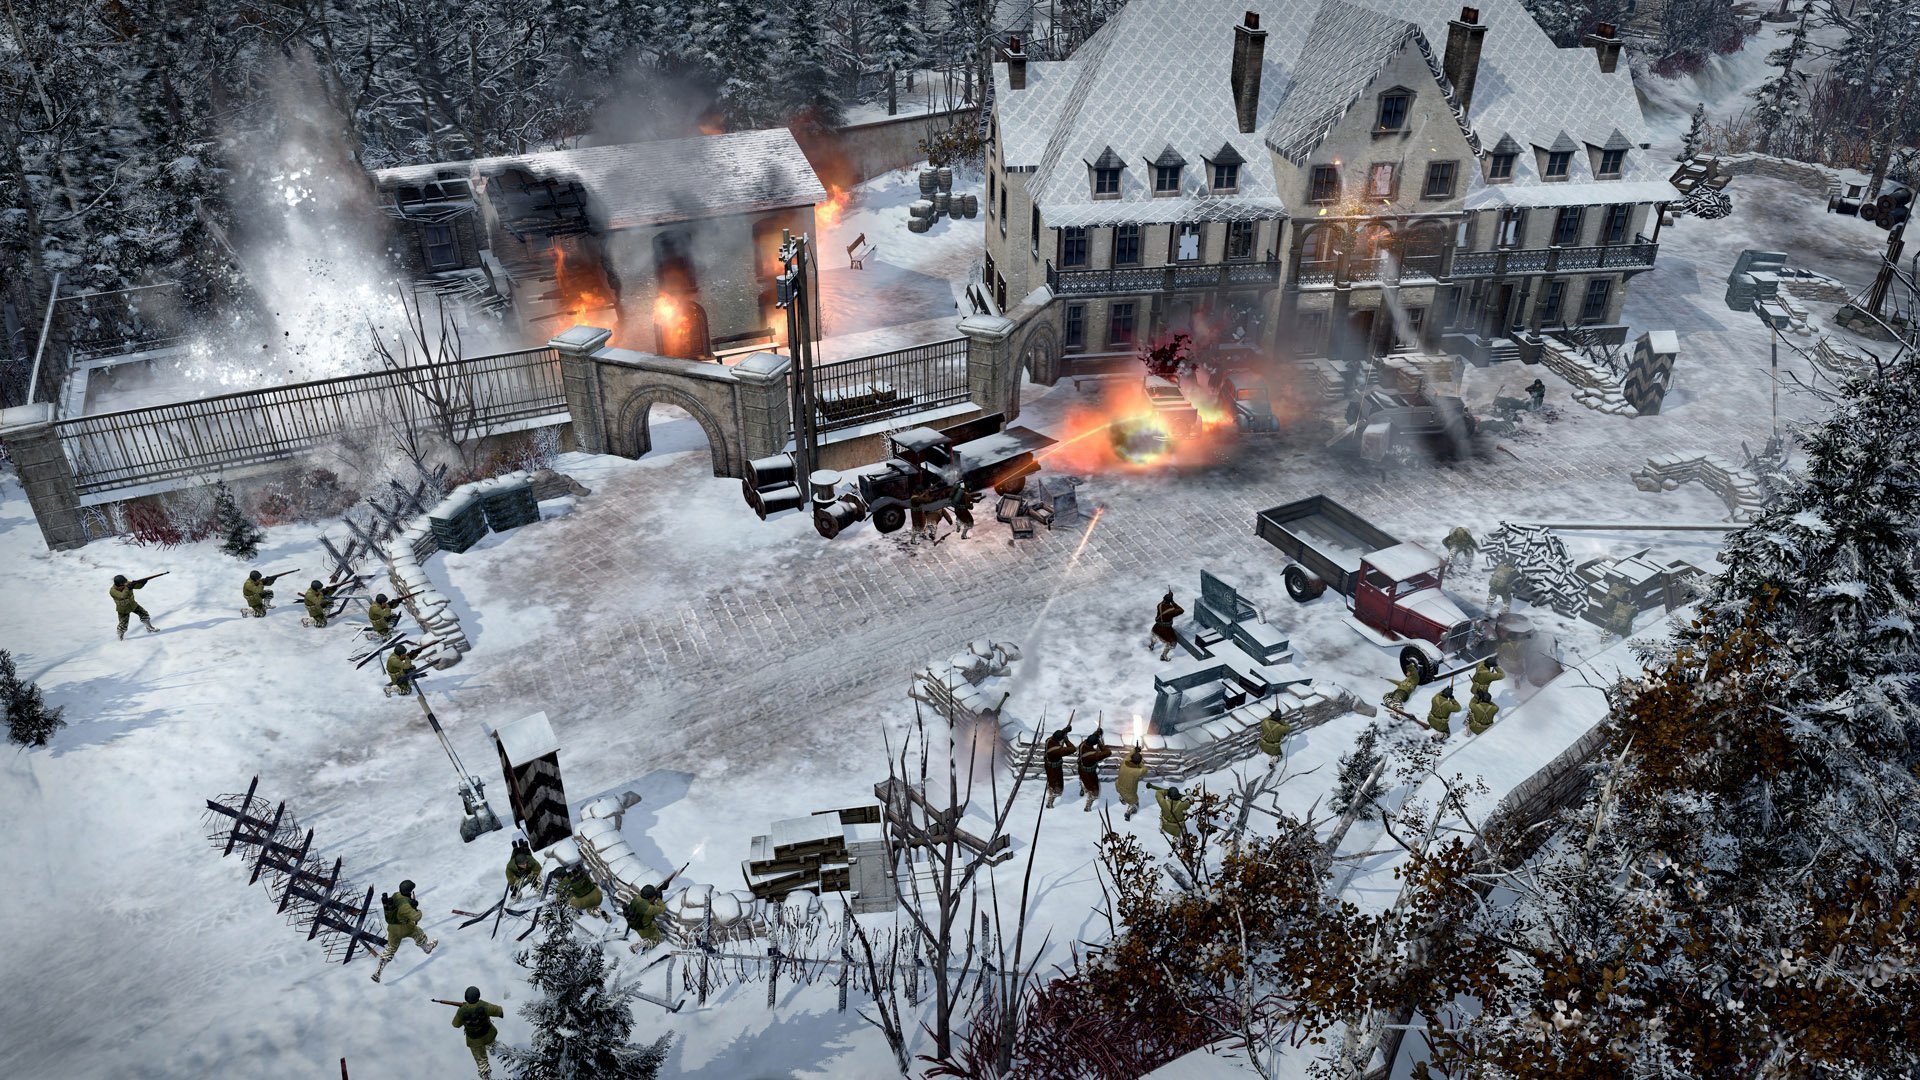 Company of heroes dlc. Company of Heroes 2: Ardennes Assault. Coh2: Ardennes Assault. Company of Heroes 2: Master collection. Игра Company of Heroes 3.